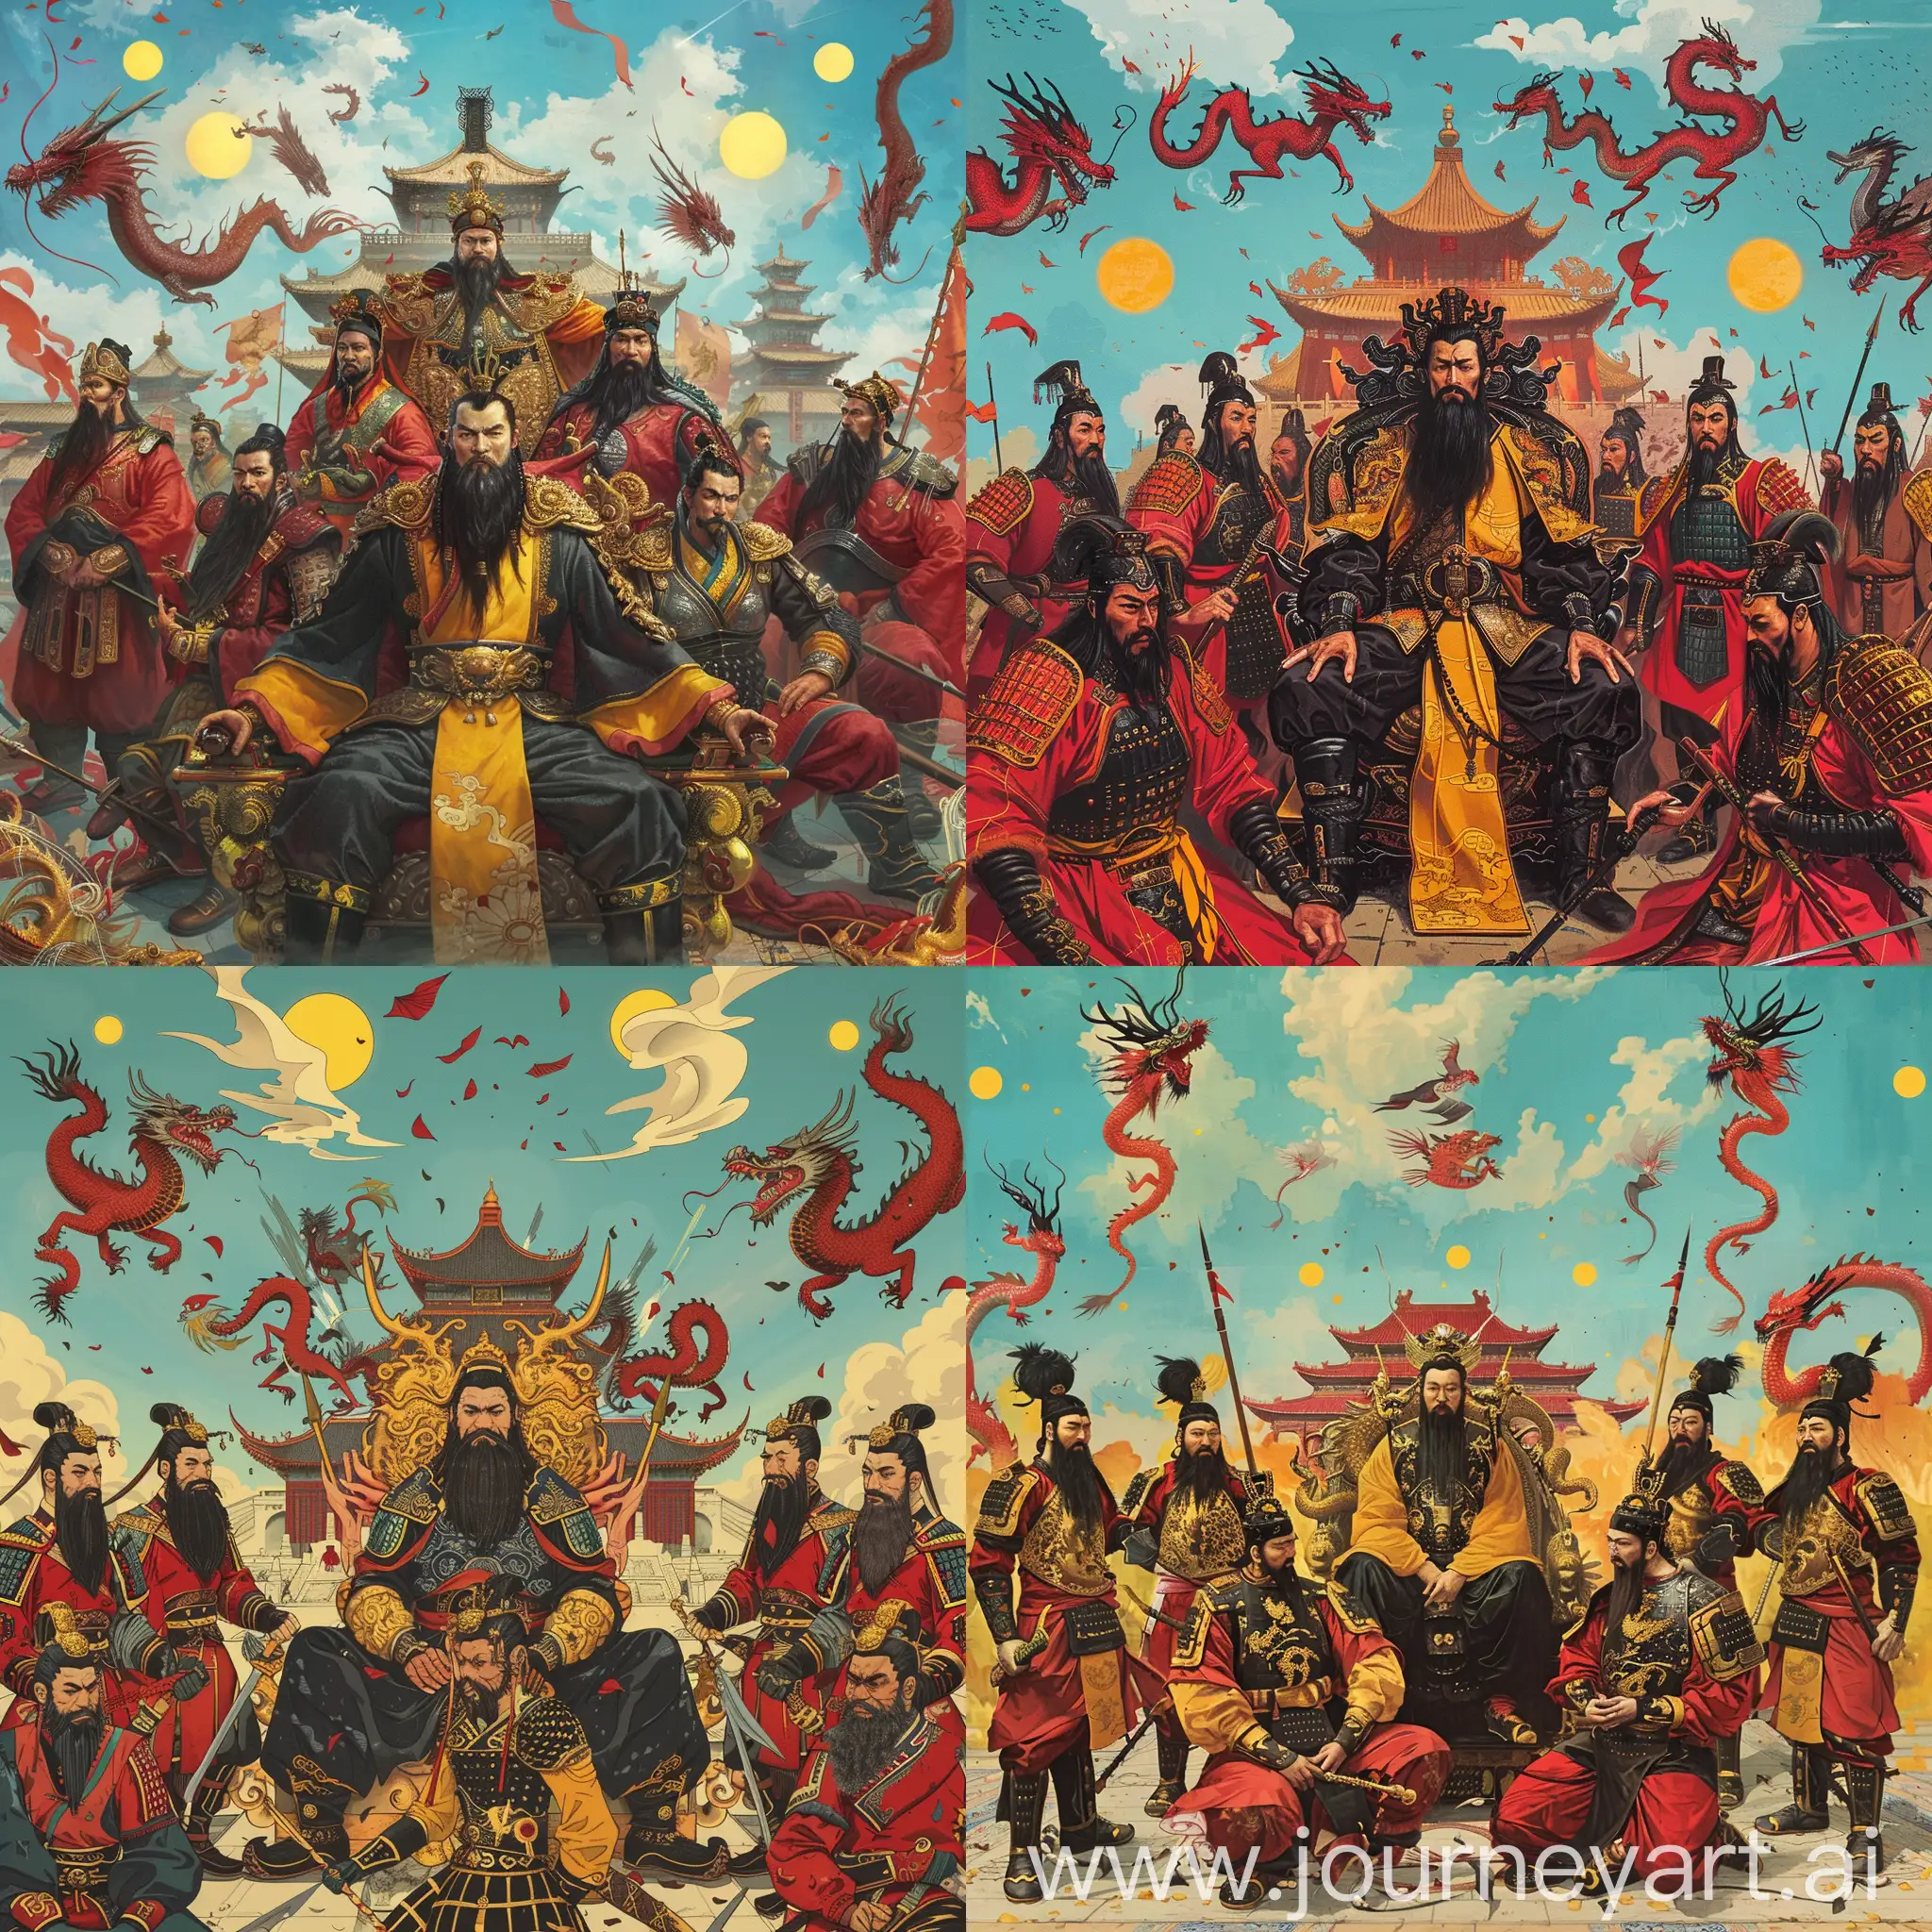 Chinese-Emperor-Qin-Shi-Huang-on-Dragon-Throne-Surrounded-by-Qin-Dynasty-Warriors-in-Imperial-Palace-Setting